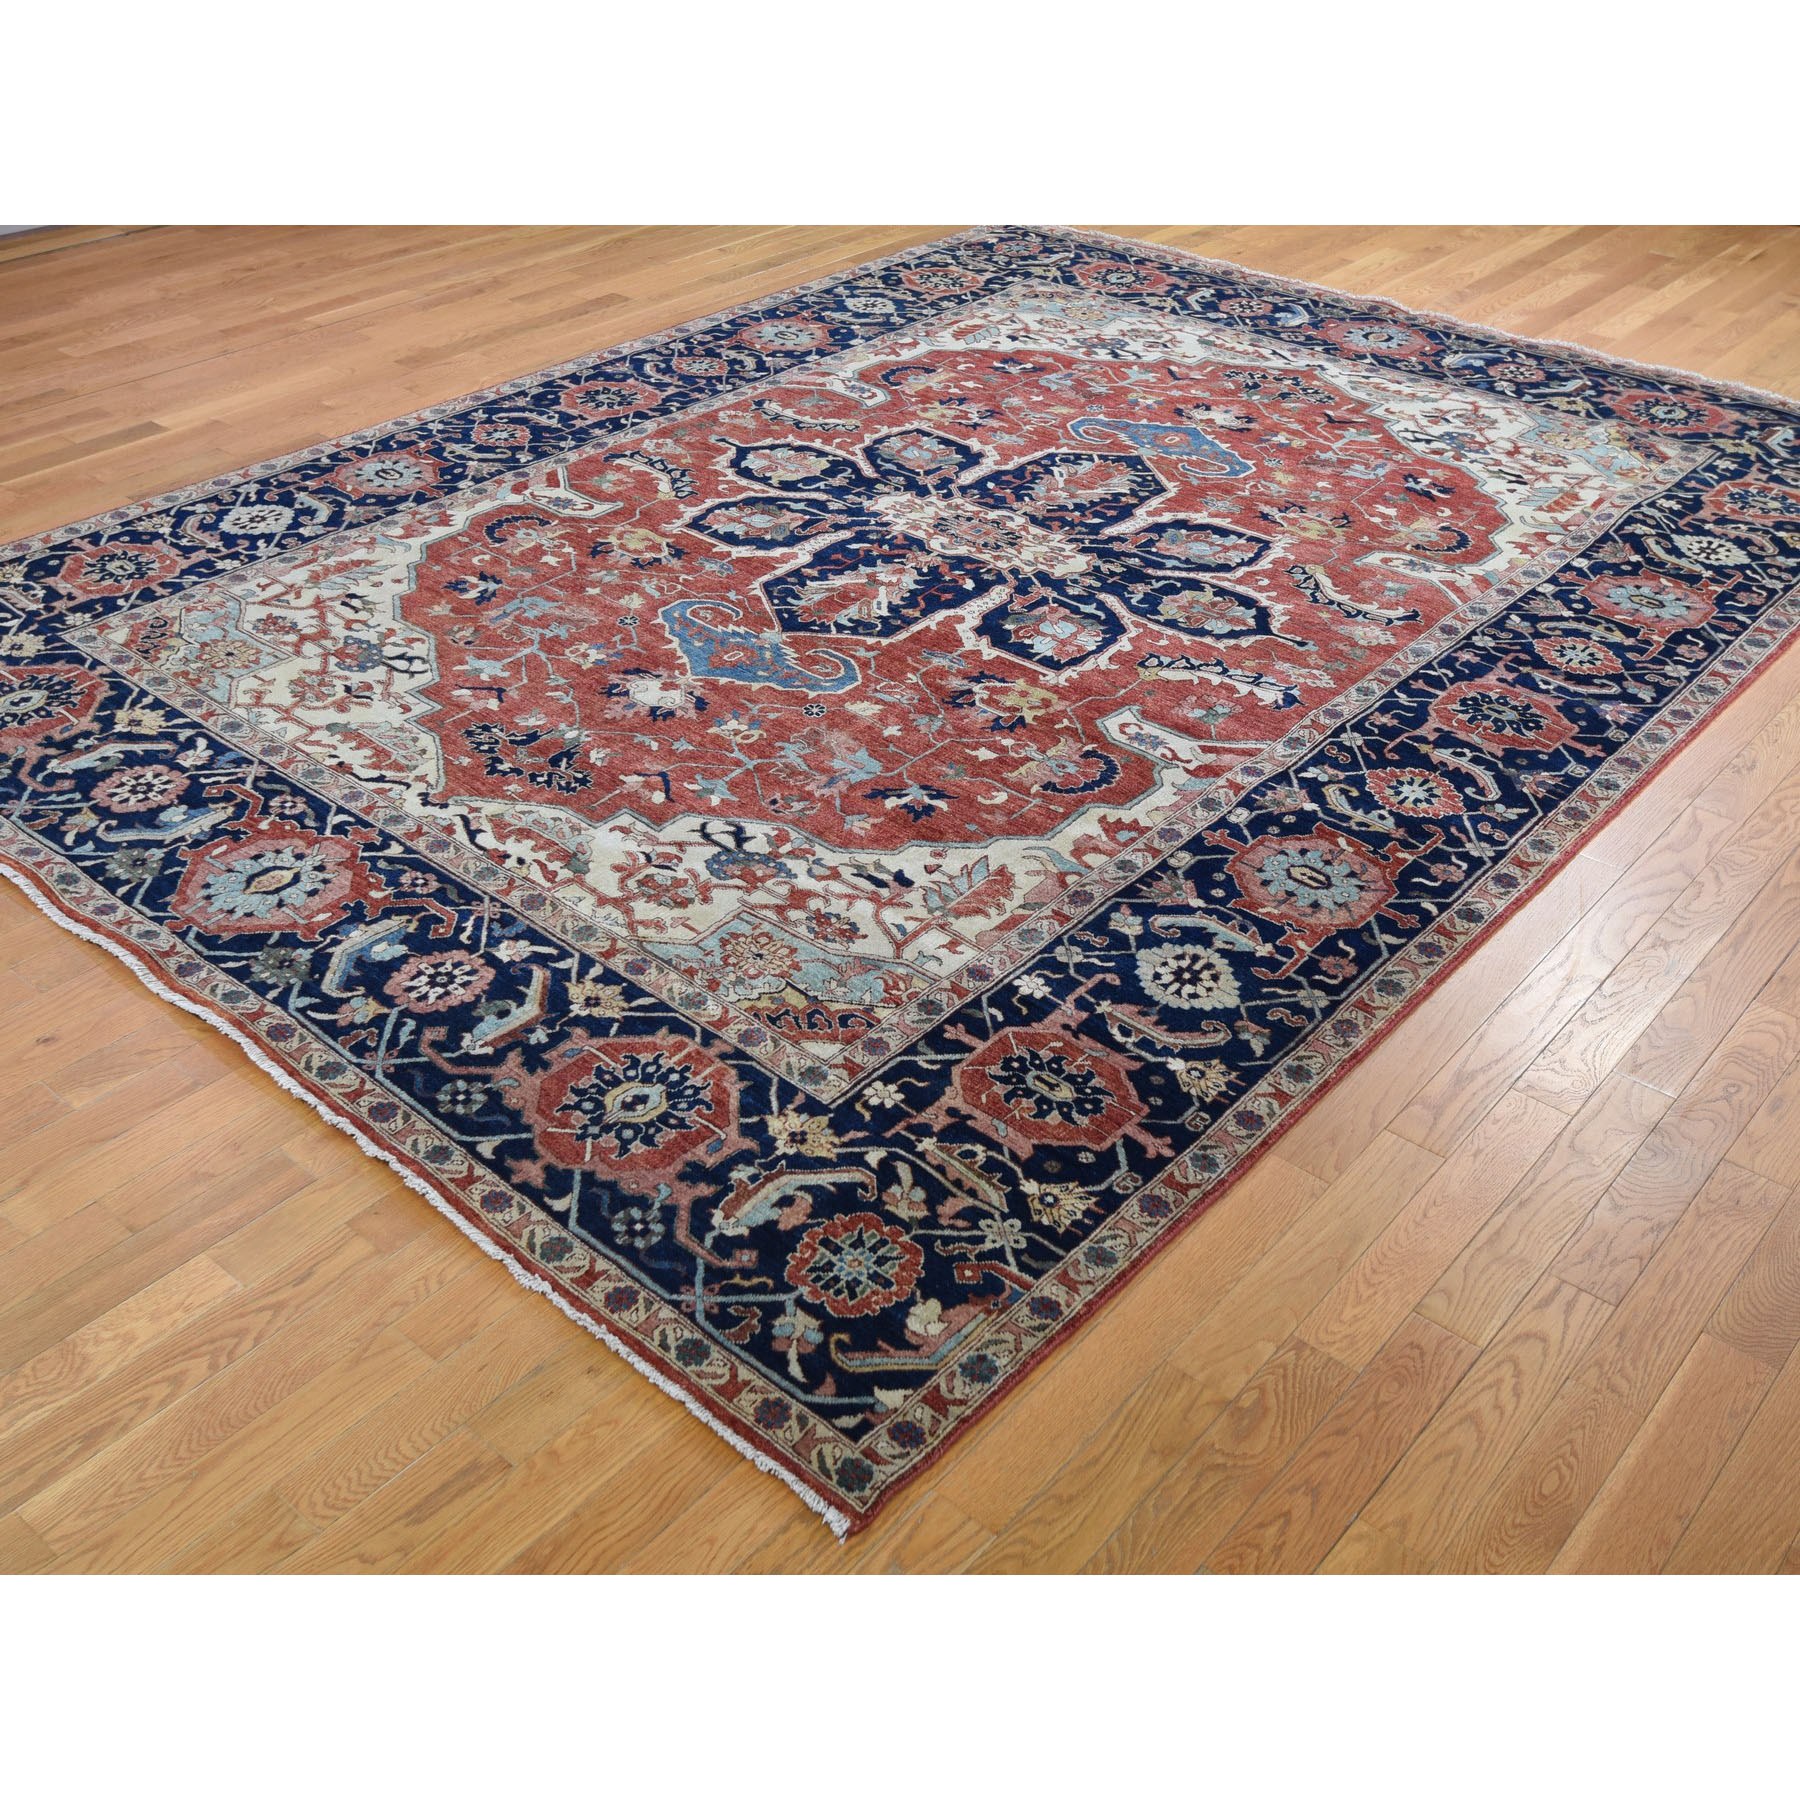 9-1 x12-1  Antiqued Heriz Re-Creation Pure Wool Hand Knotted Oriental Rug 